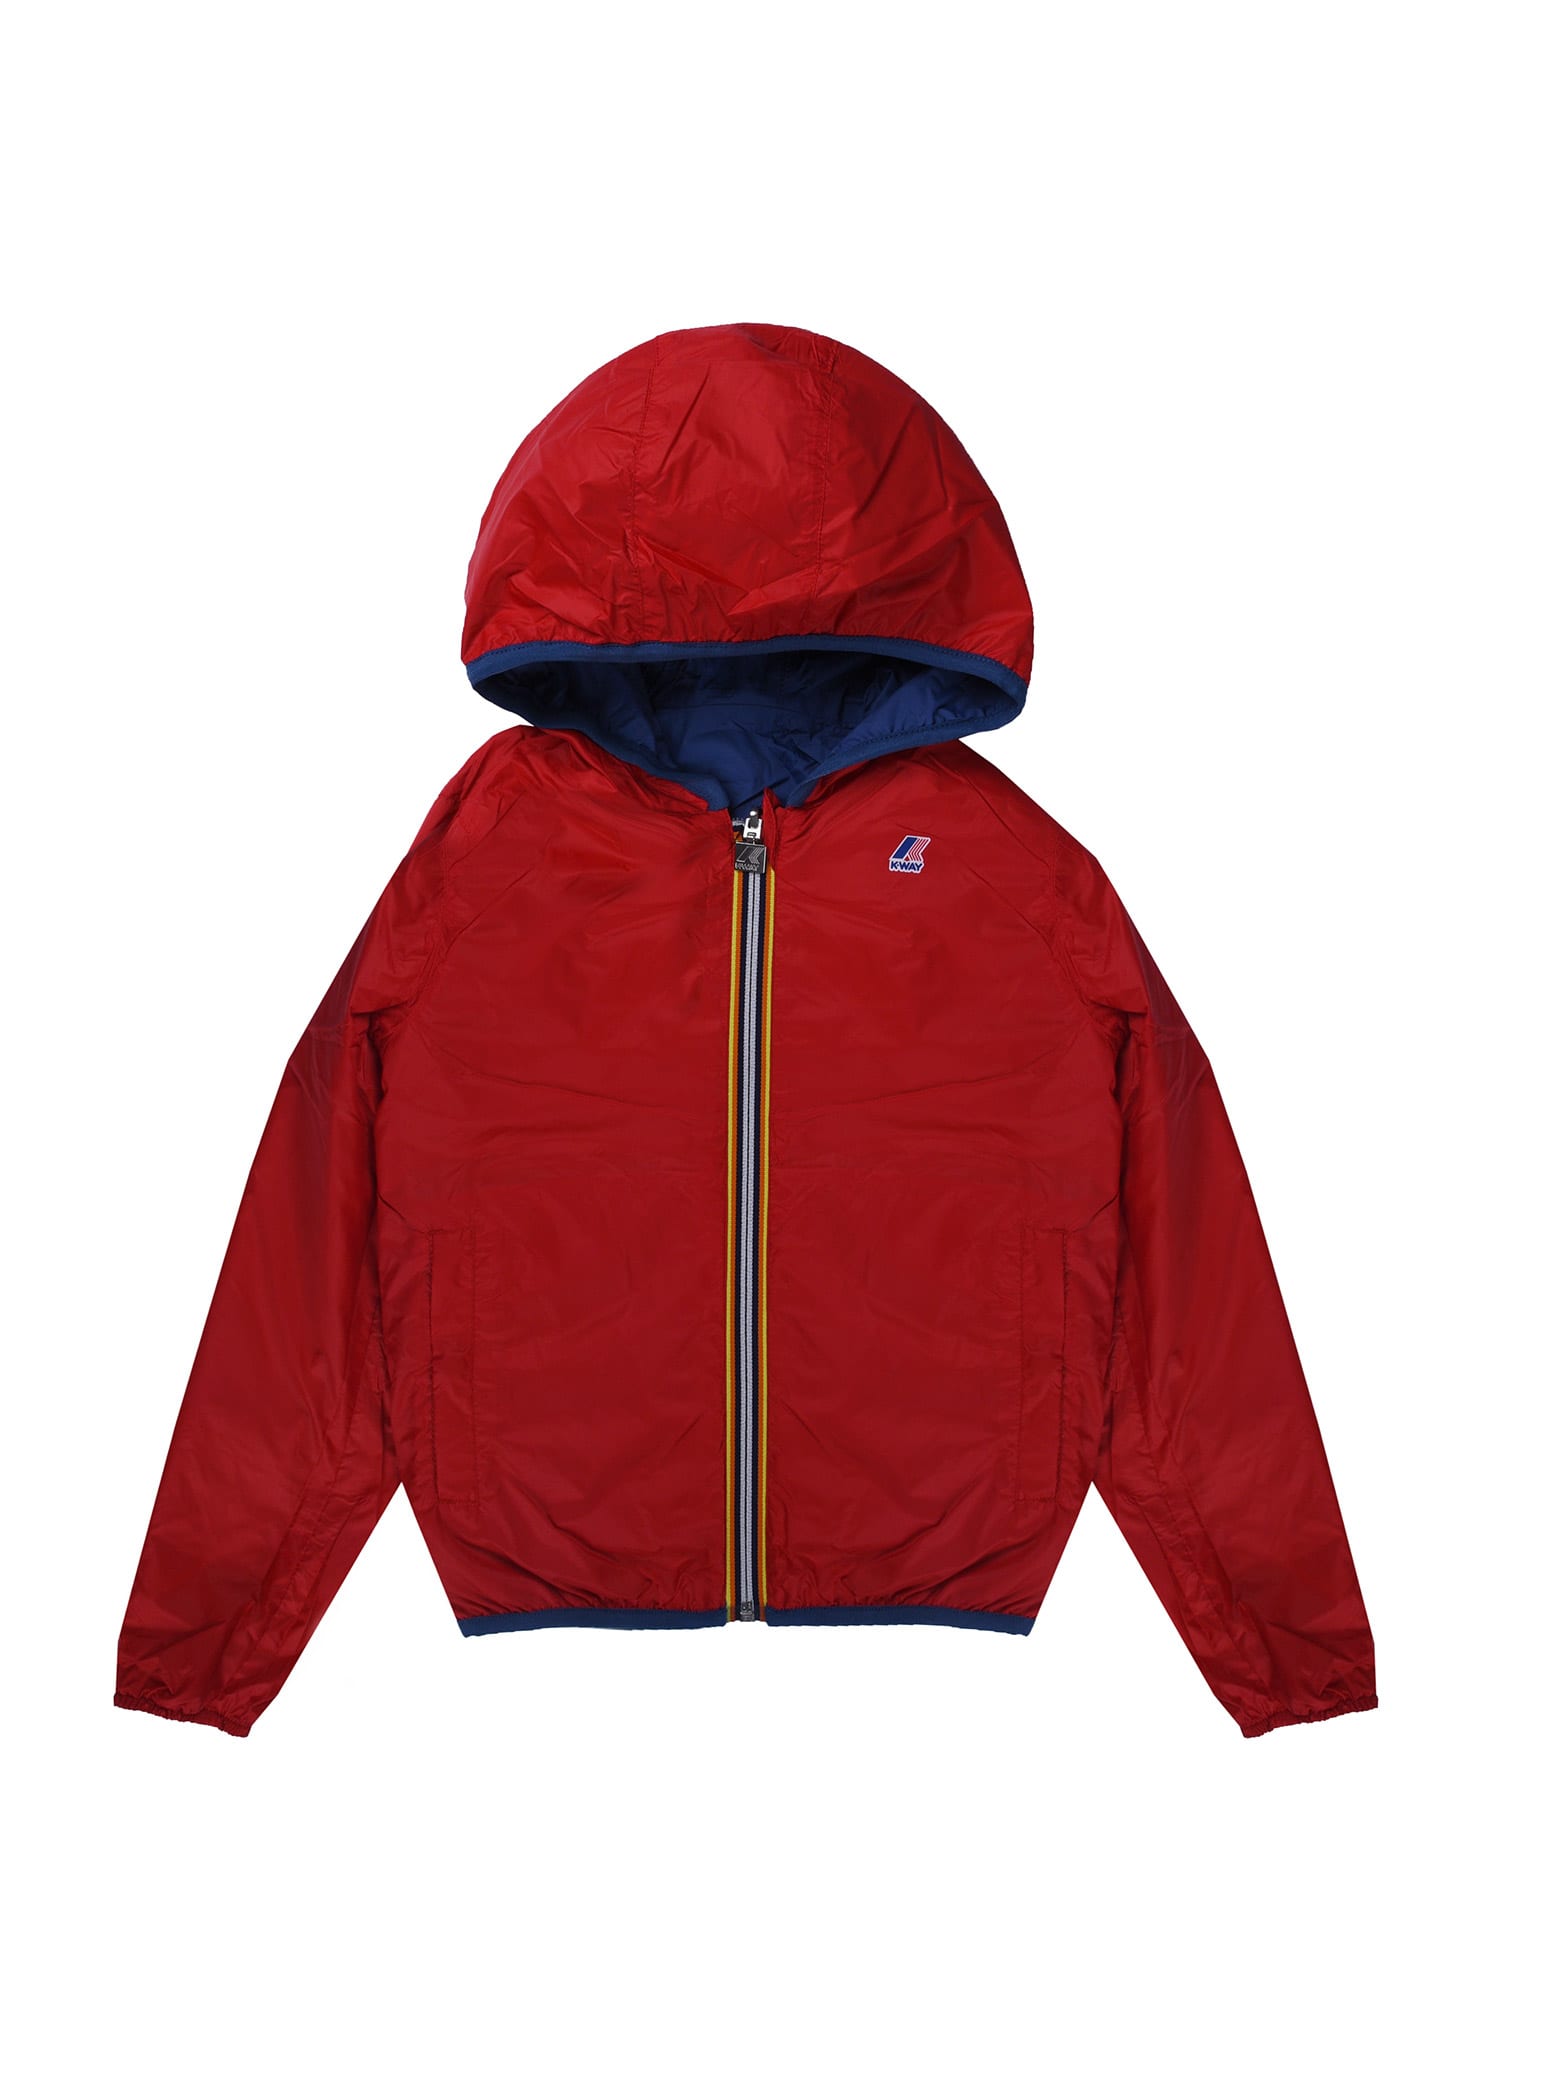 K-way Reversible Bluee And Red